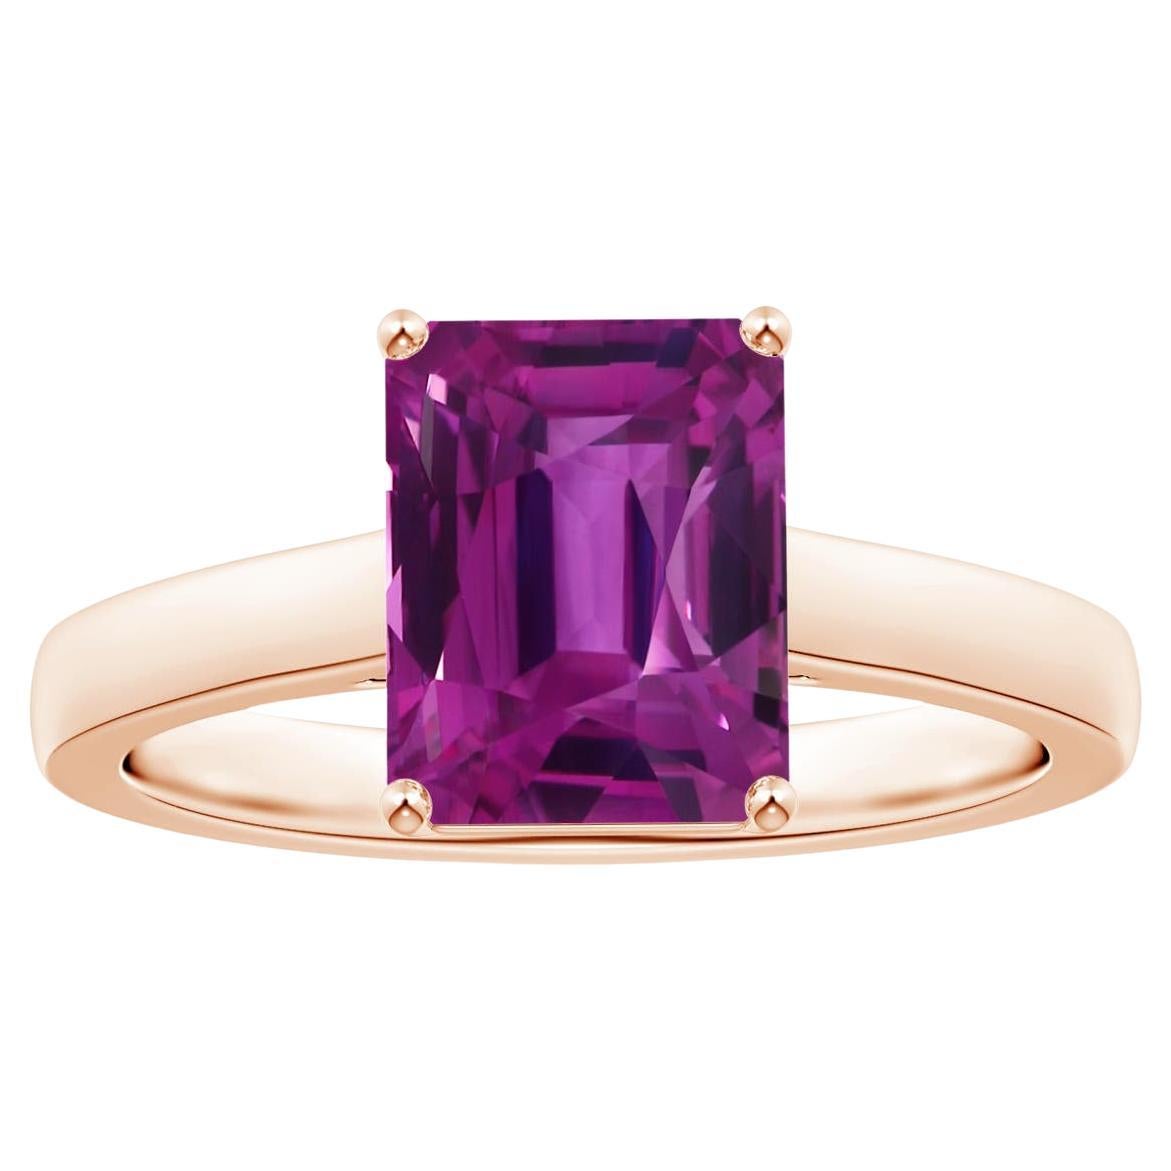 For Sale:  ANGARA GIA Certified Emerald-Cut Pink Sapphire Solitaire Ring in Rose Gold